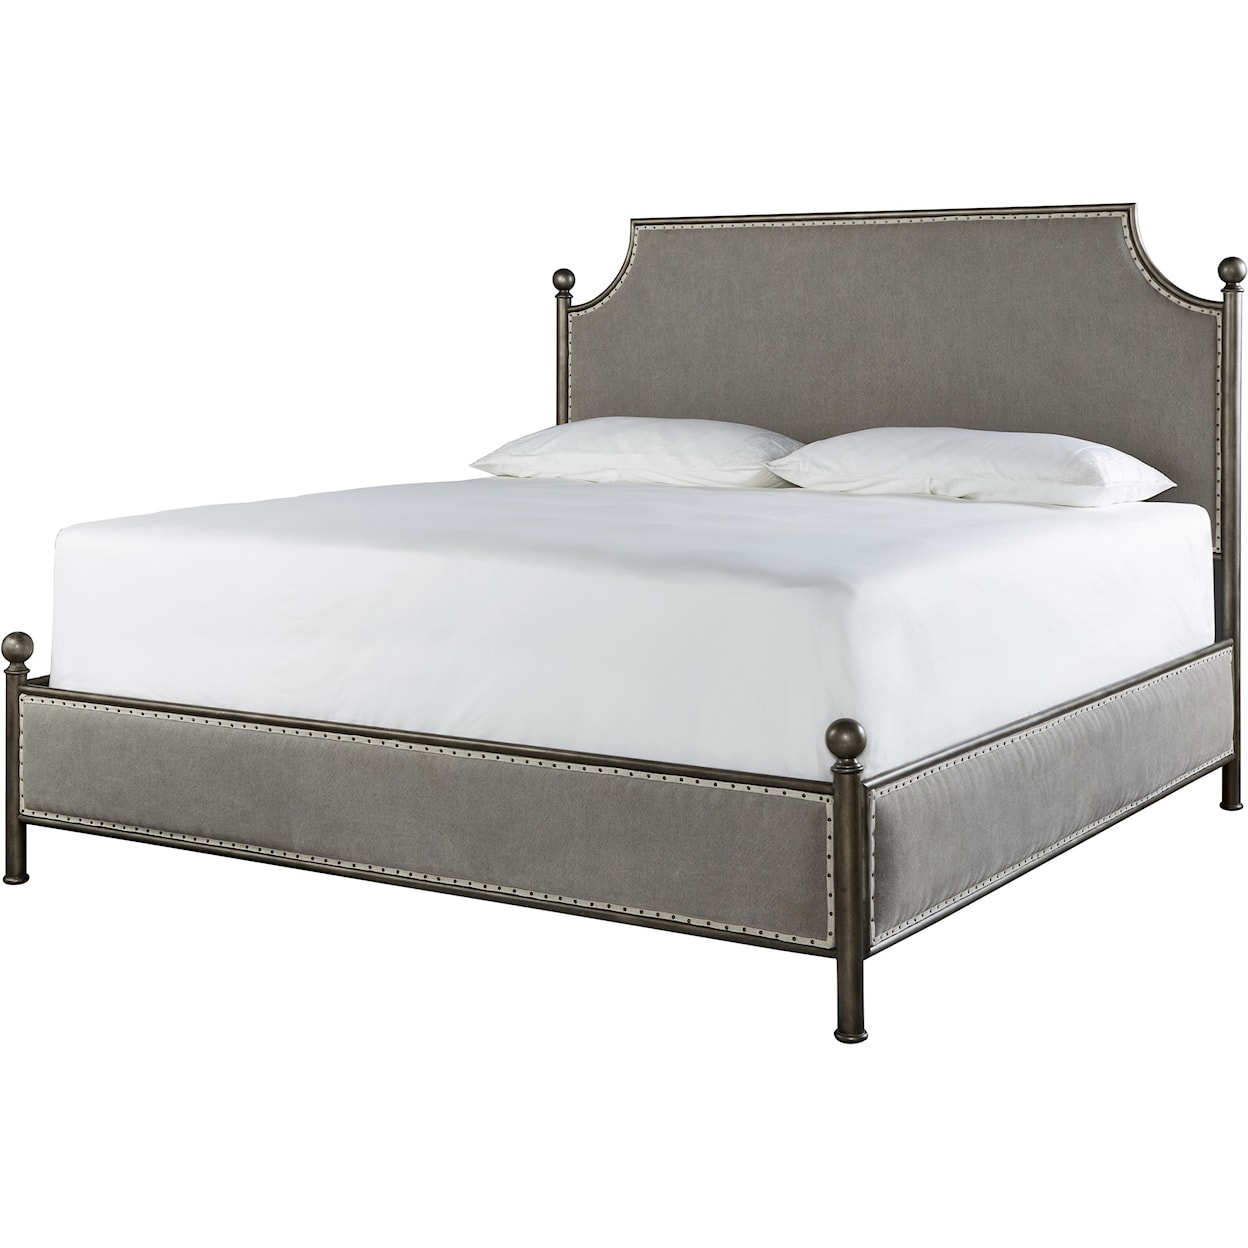 Universal Sojourn 543B290B Respite King Upholstered Bed with Removable ...